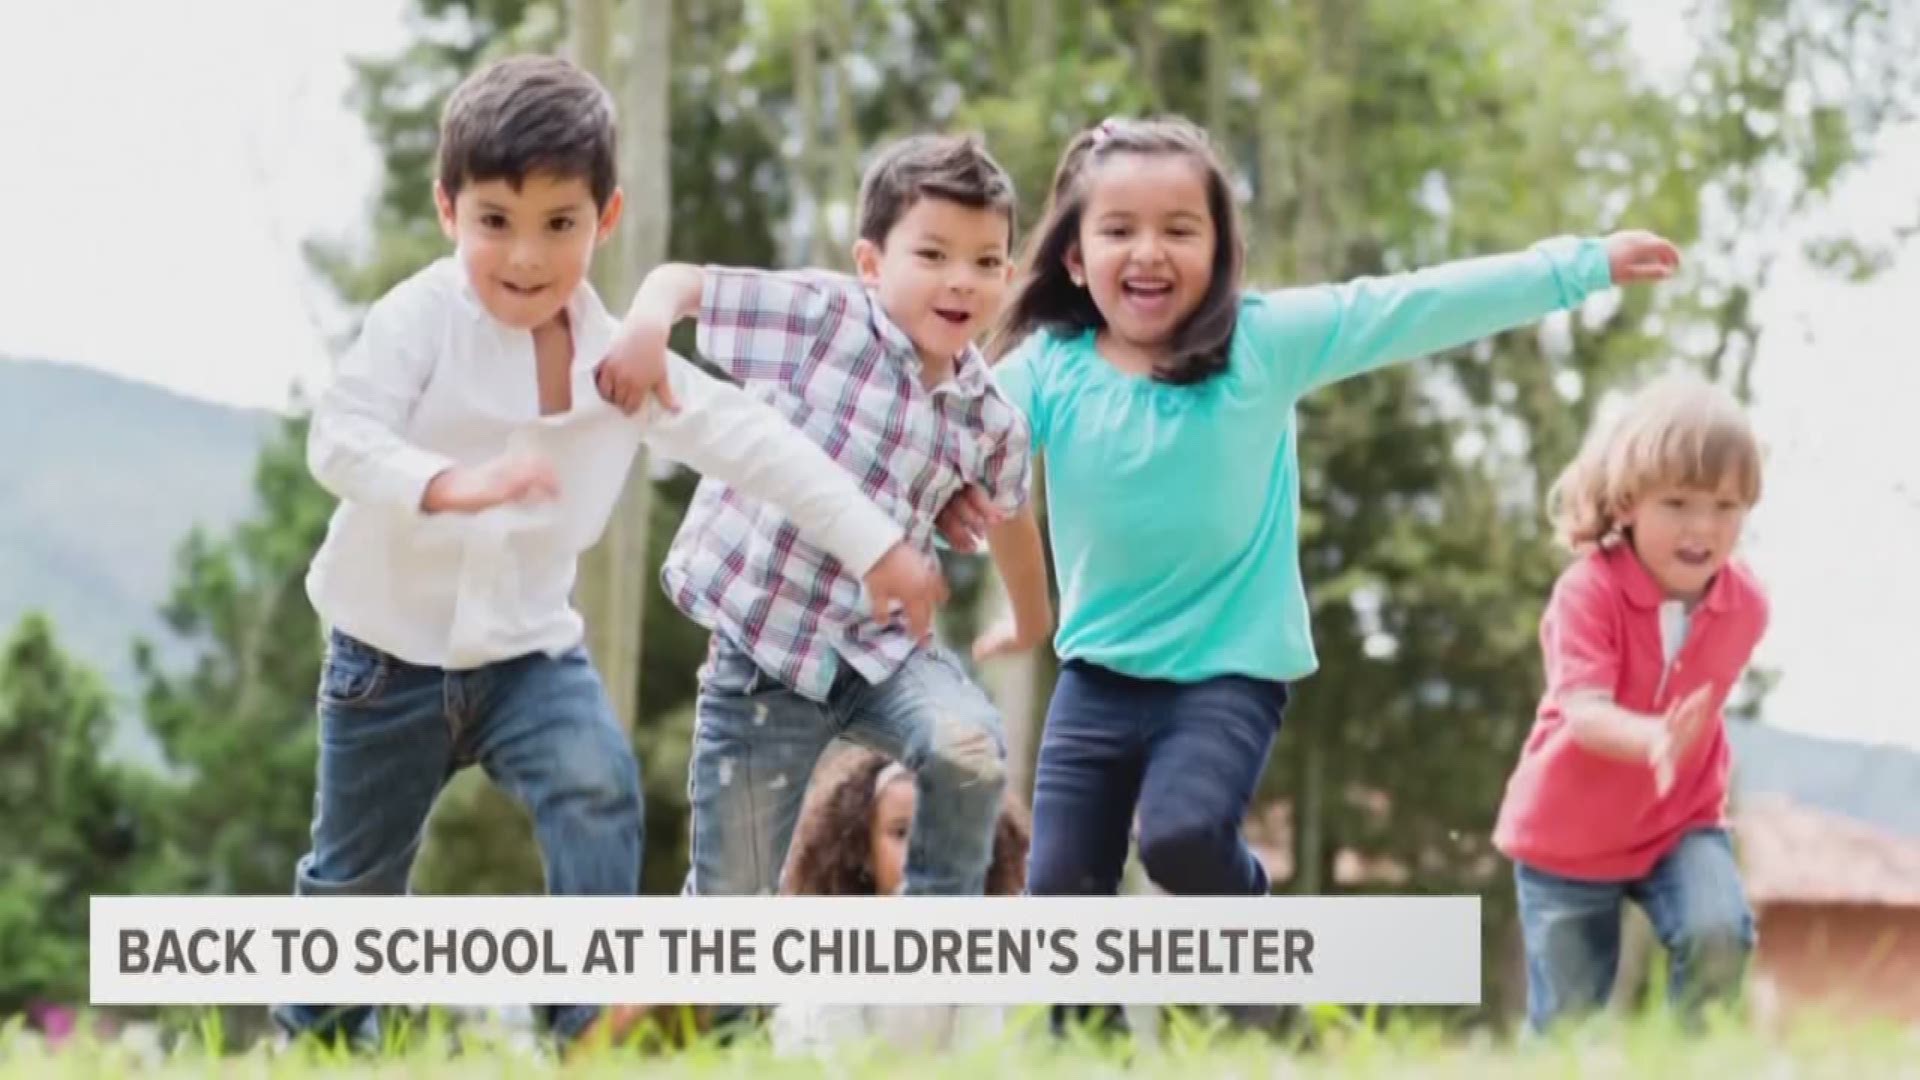 We spoke with the Children's Shelter of San Antonio.